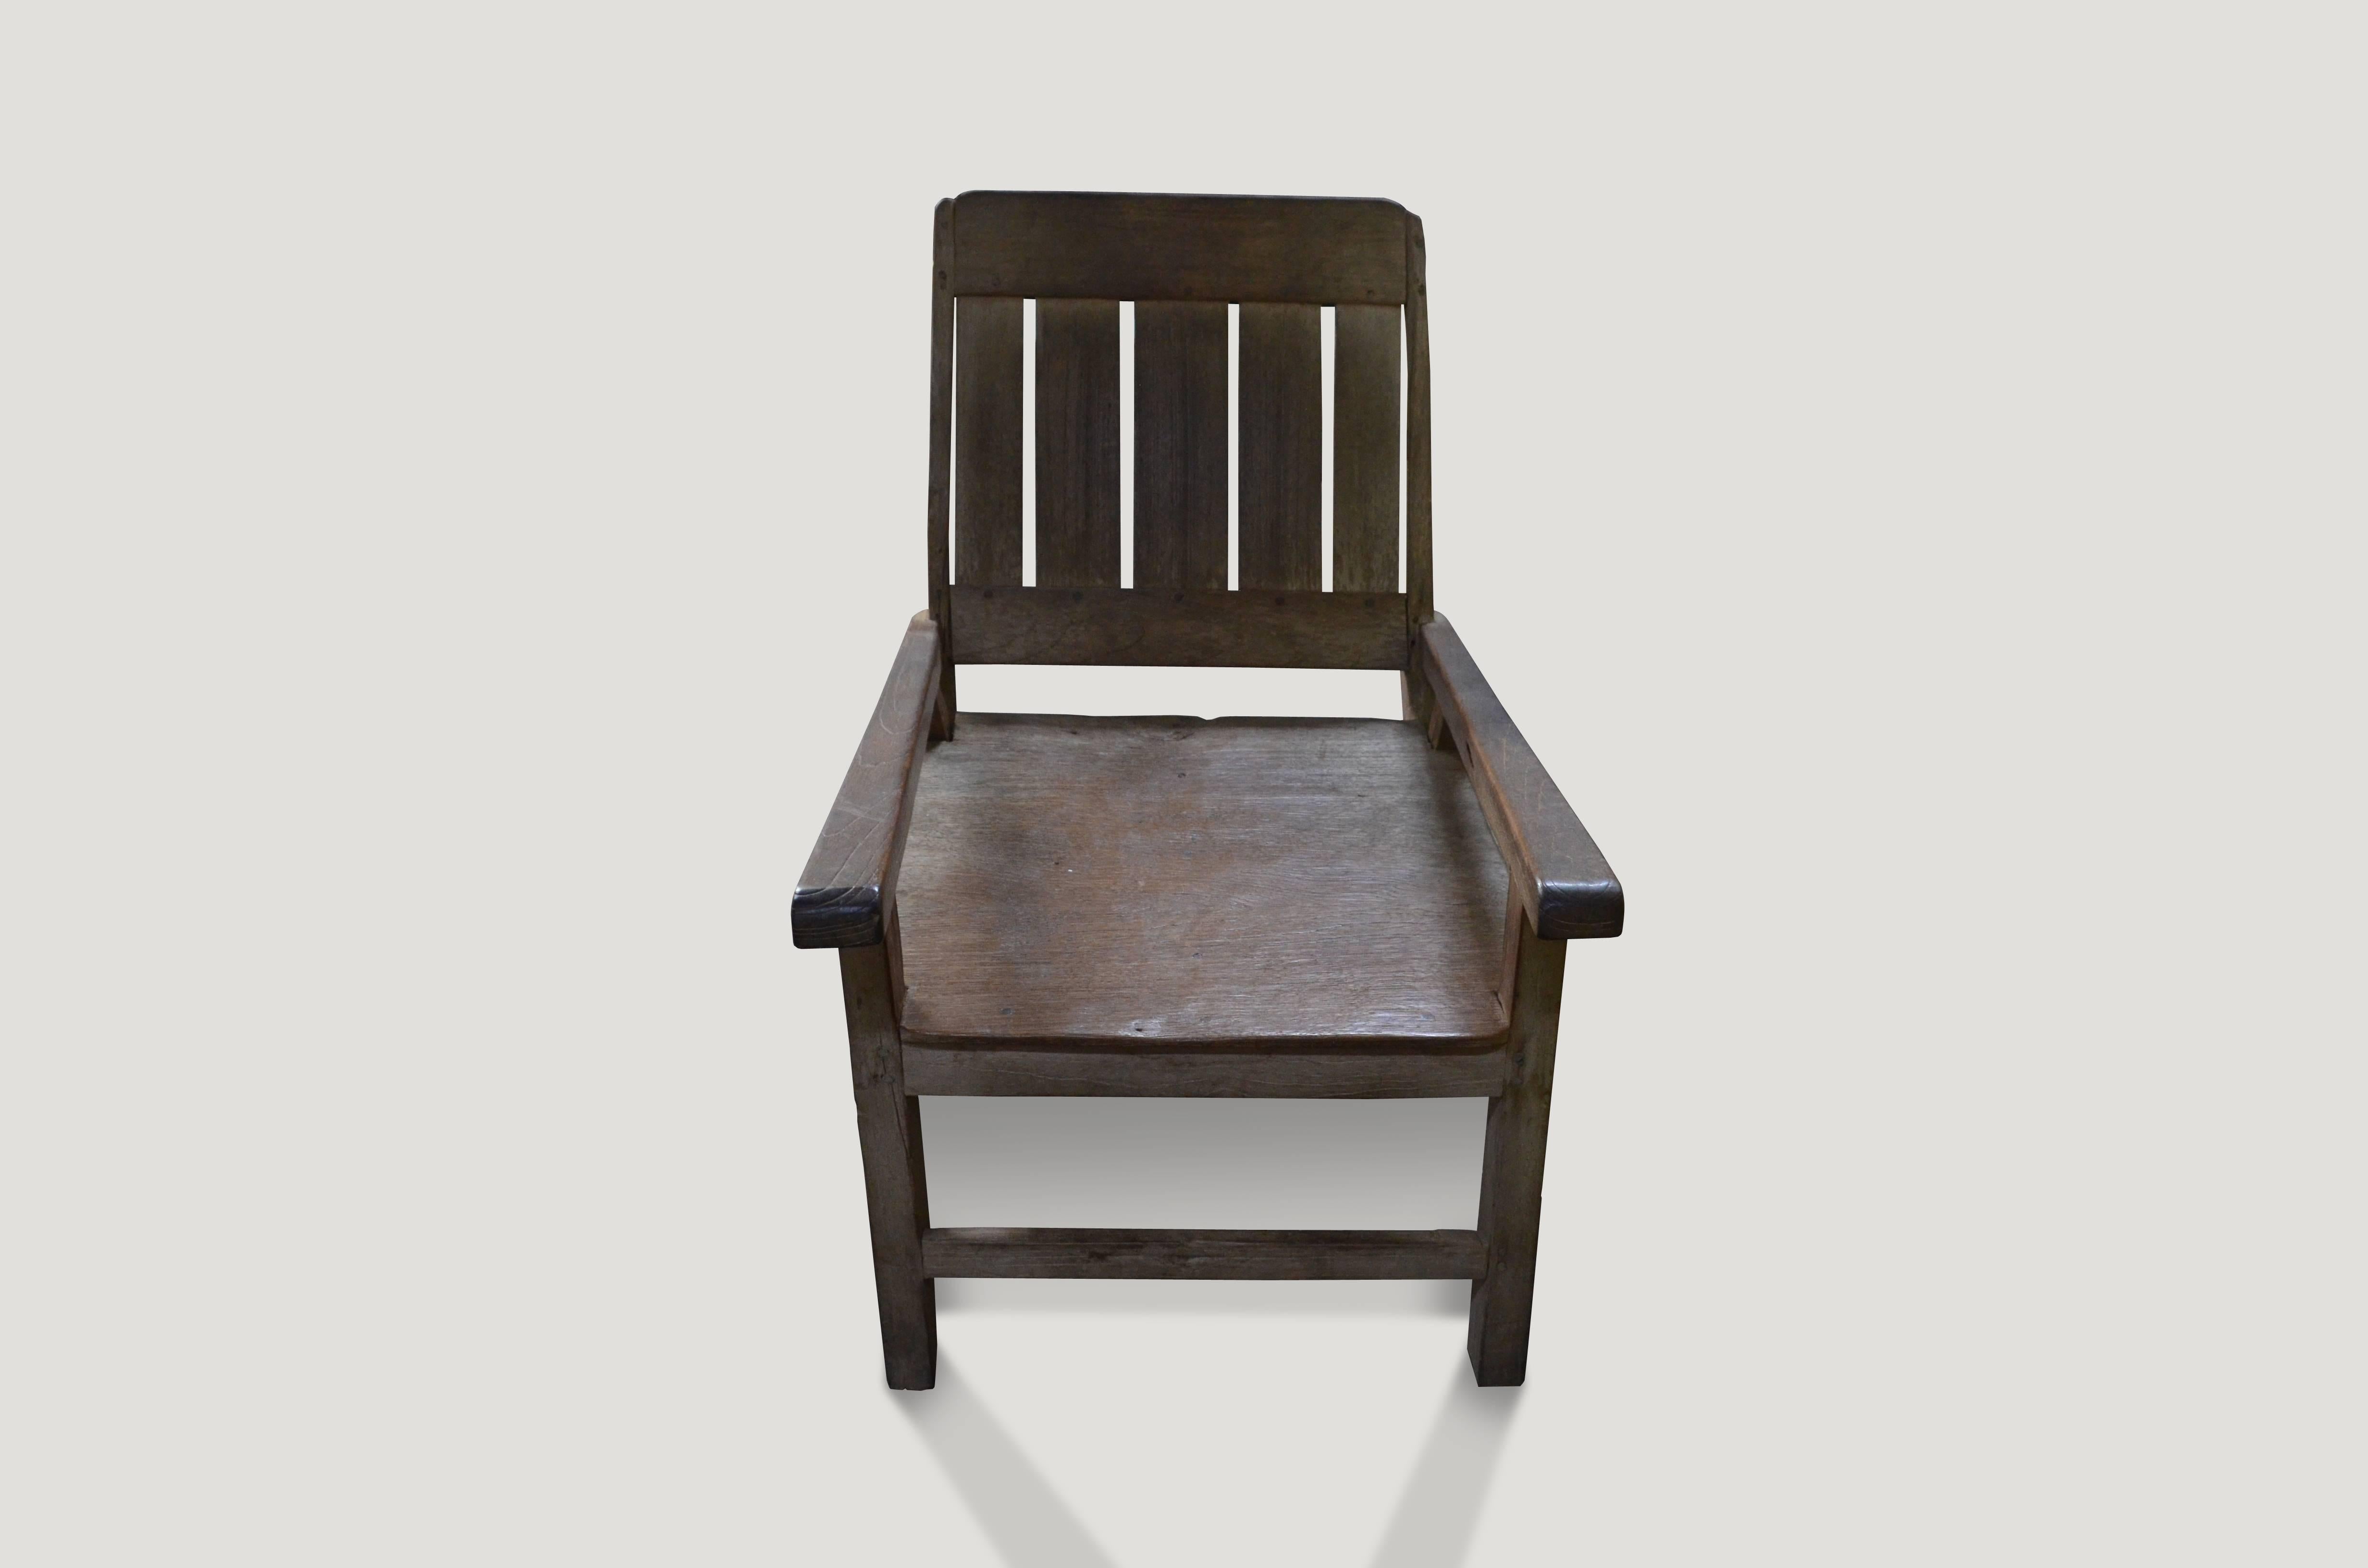 Antique teak wood relaxing chair with beautiful patina.

This chair was sourced in the spirit of wabi-sabi, a Japanese philosophy that beauty can be found in imperfection and impermanence. It’s a beauty of things modest and humble. It’s a beauty of